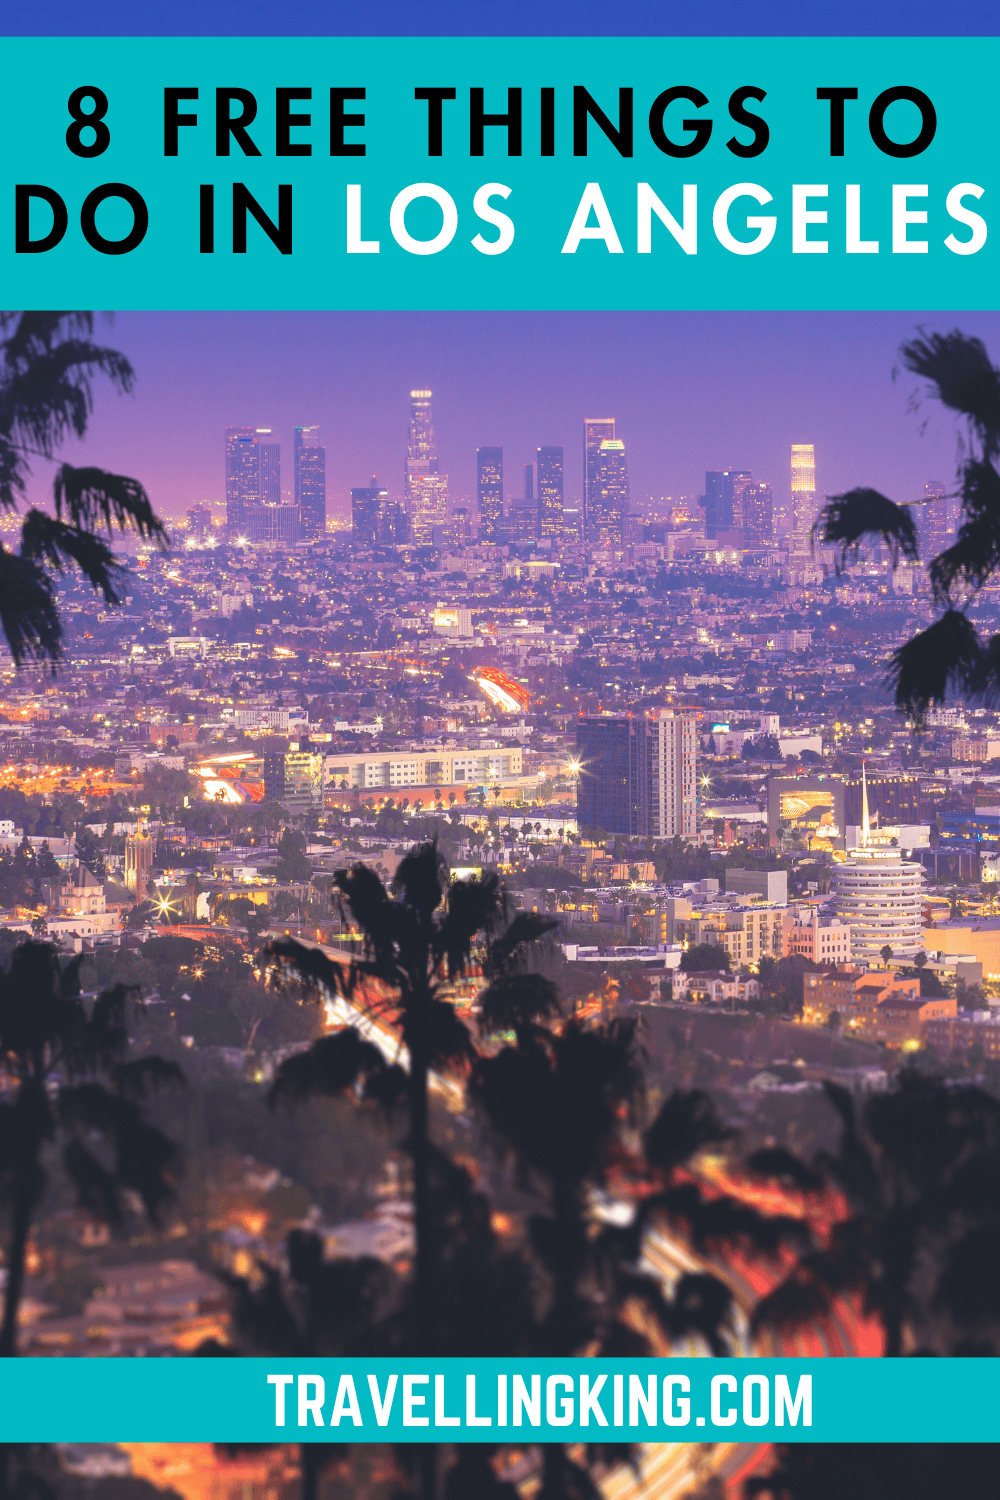 8 FREE Things to Do in Los Angeles